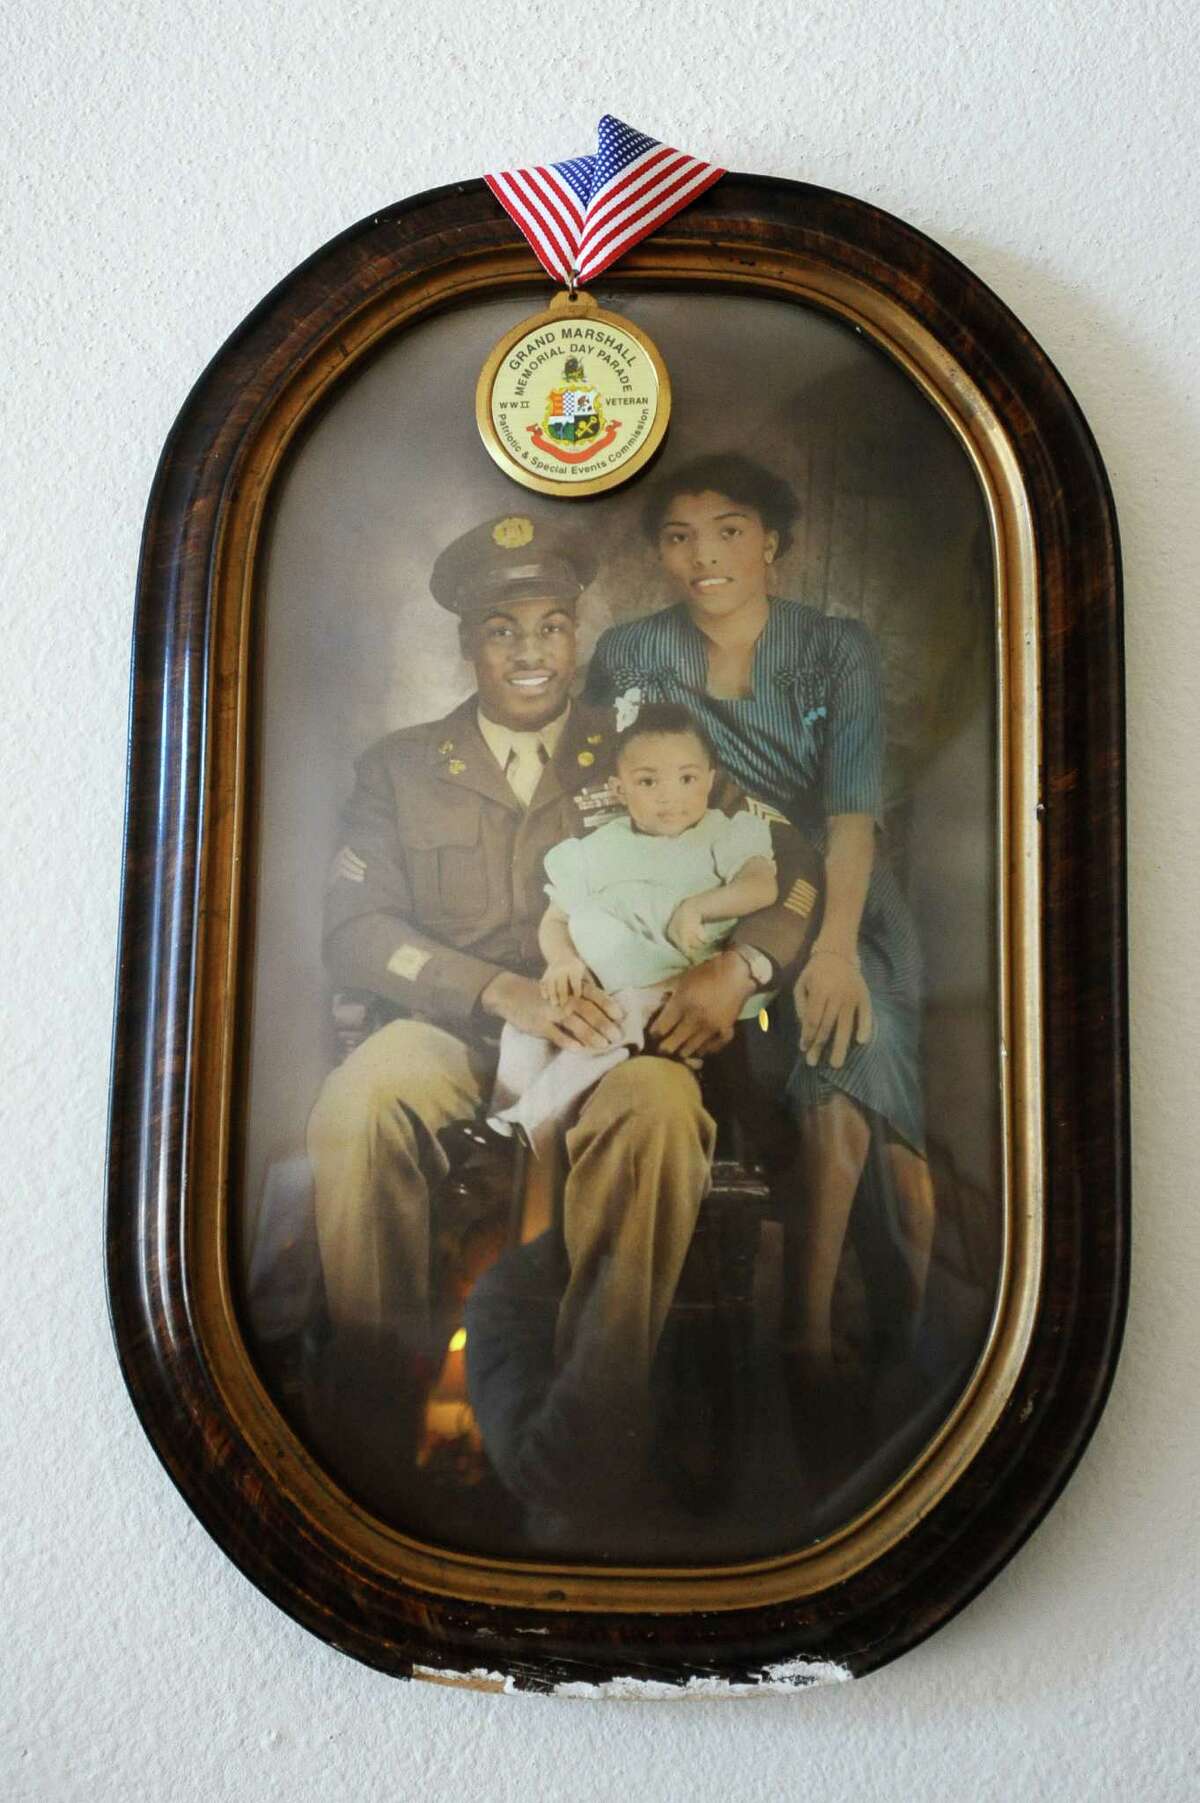 A family photo of young Archie Elam, with his parents inside his home on Glenbrook Rd. in Stamford, Conn. on Tuesday, Dec. 20, 2016. Elam's father served the U.S. Army in WWII.